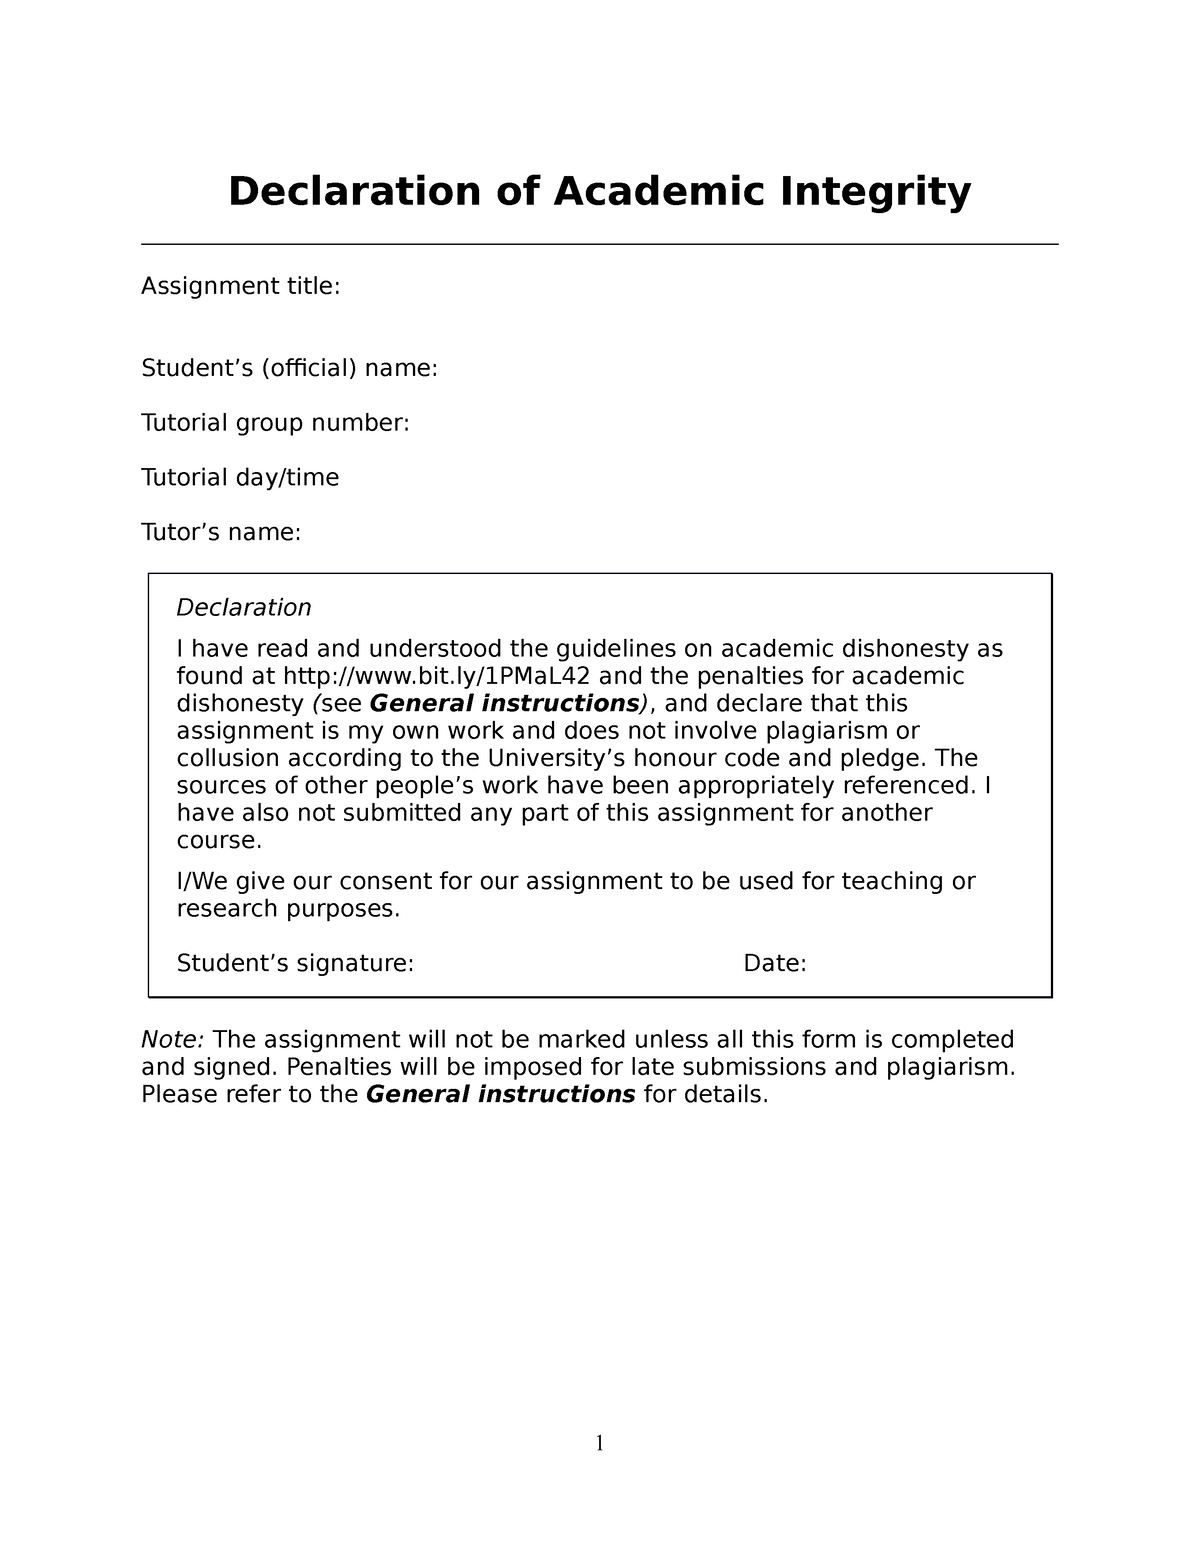 assignment on academic integrity